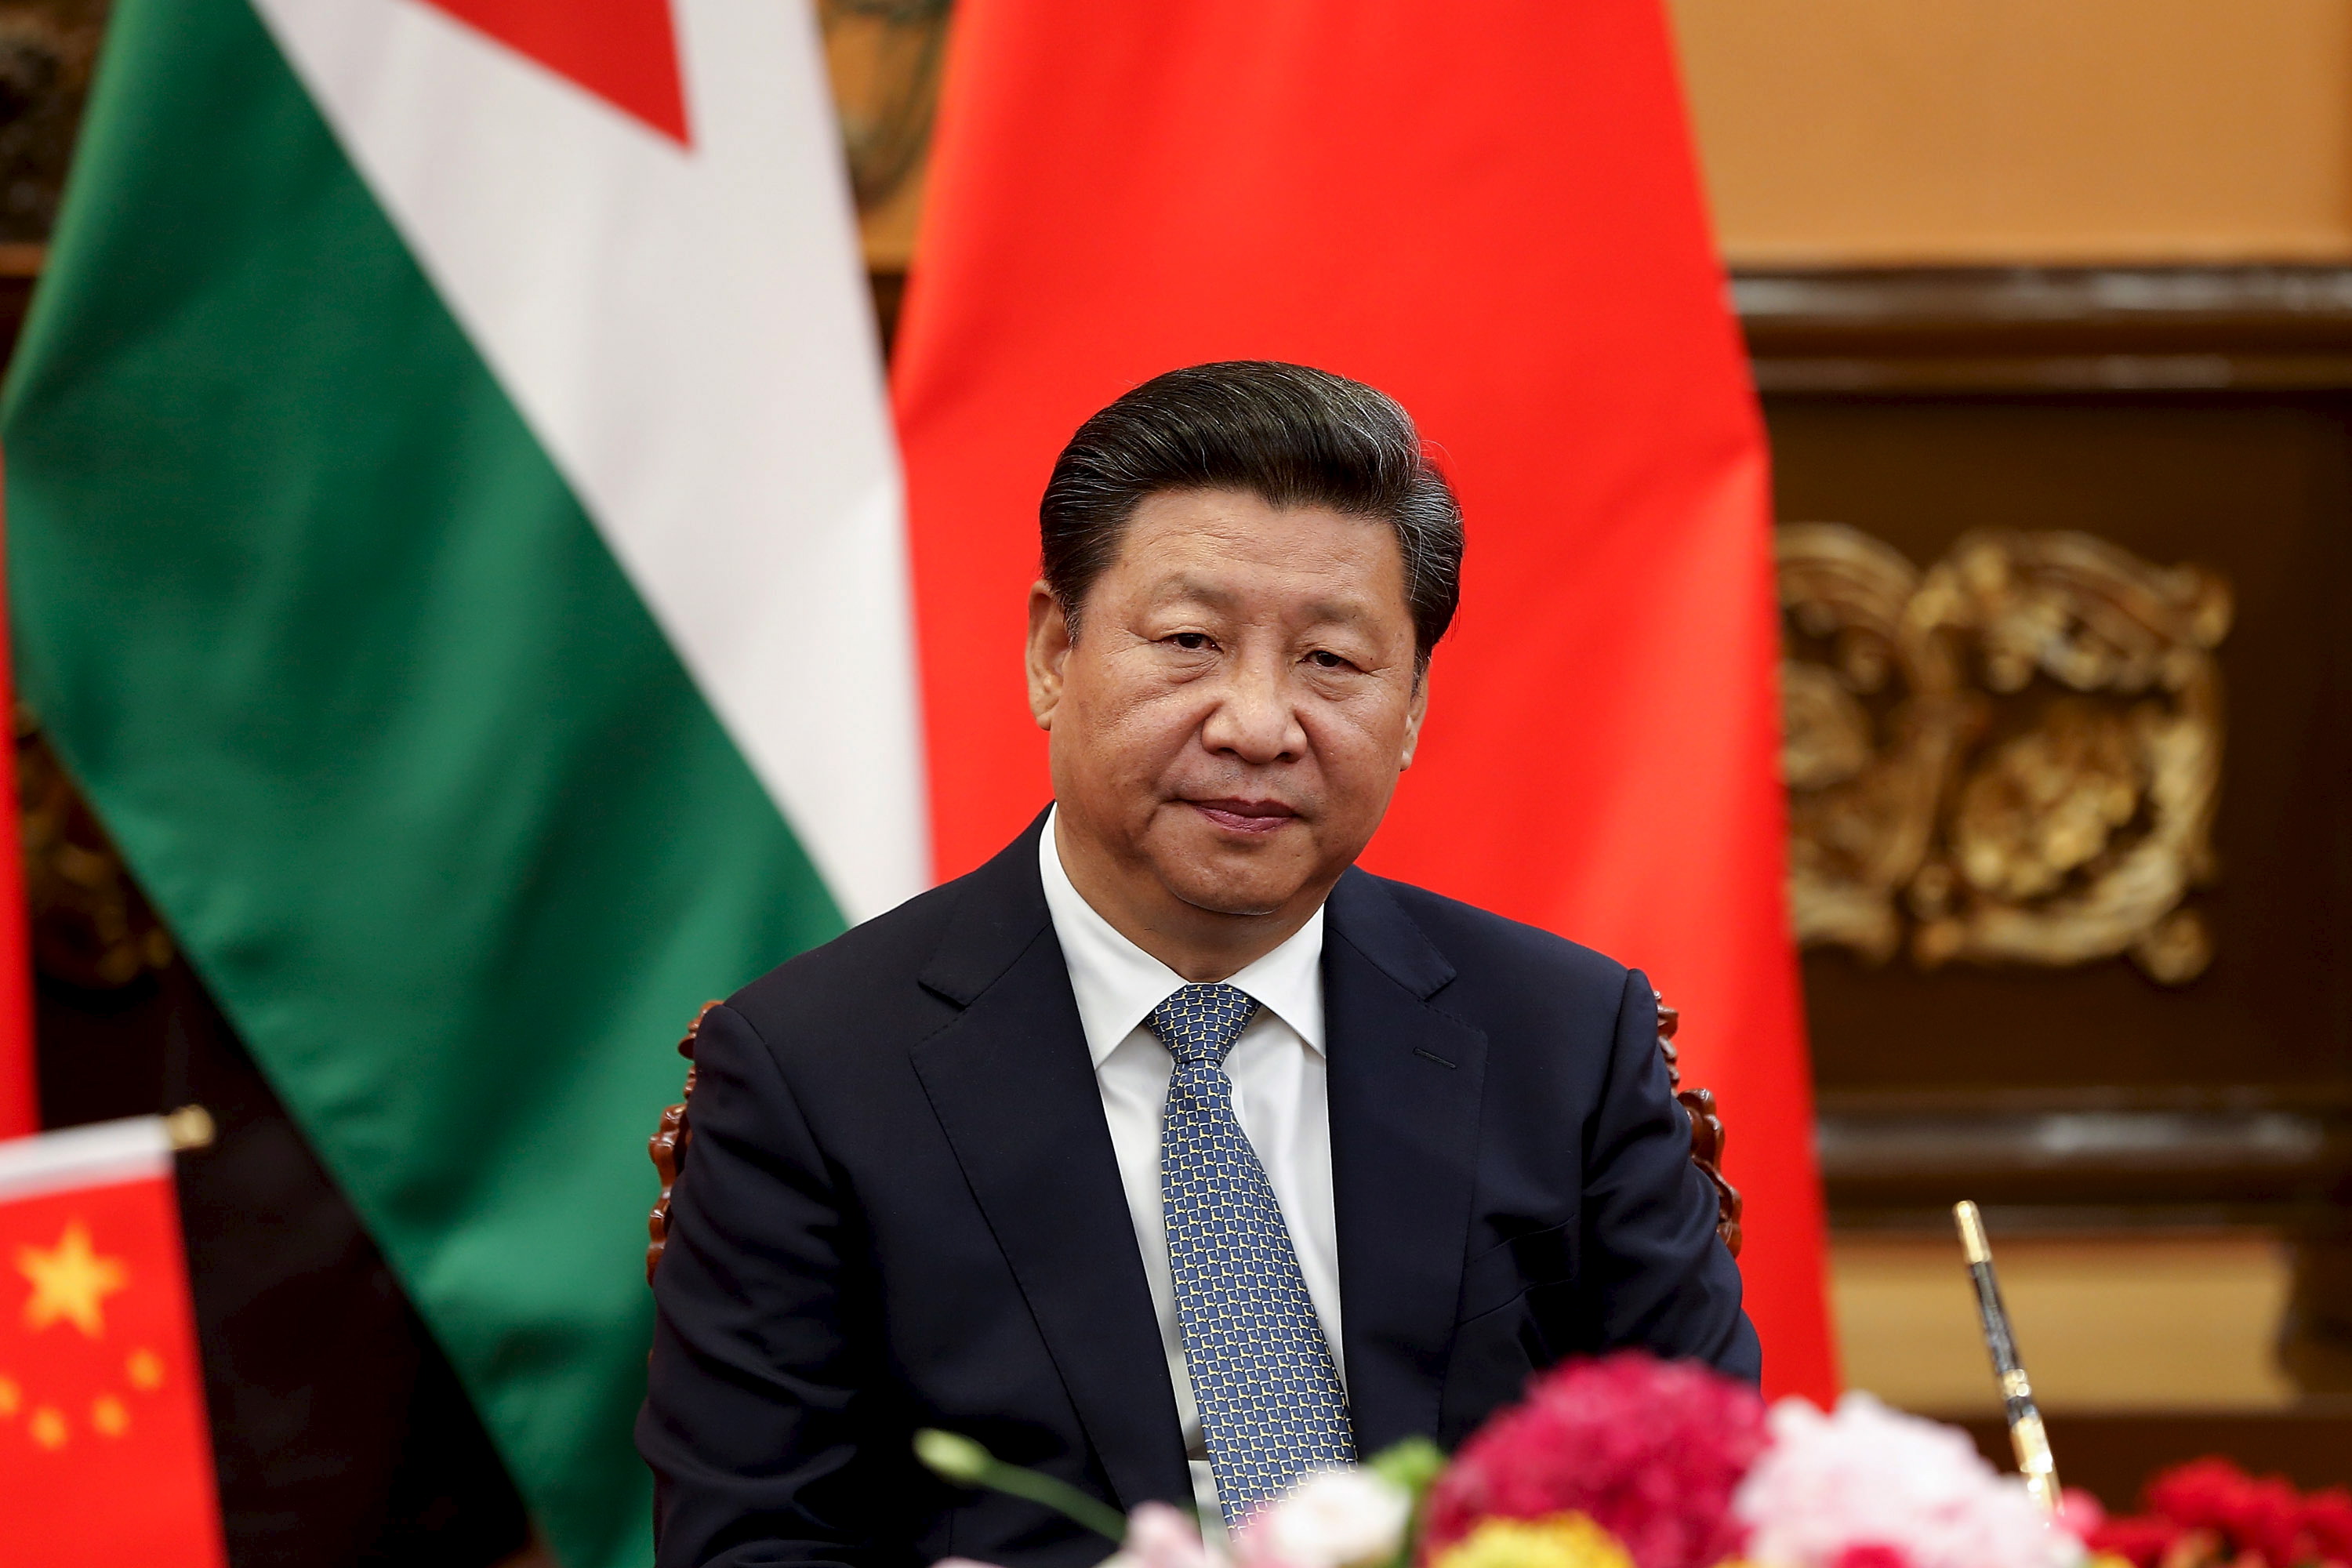 China's President Xi Jinping attends a signing ceremony with King of Jordan Abdullah II (not pictured) at he Great Hall of the People in Beijing on Sept. 9, 2015 (Lintao Zhang—Reuters)